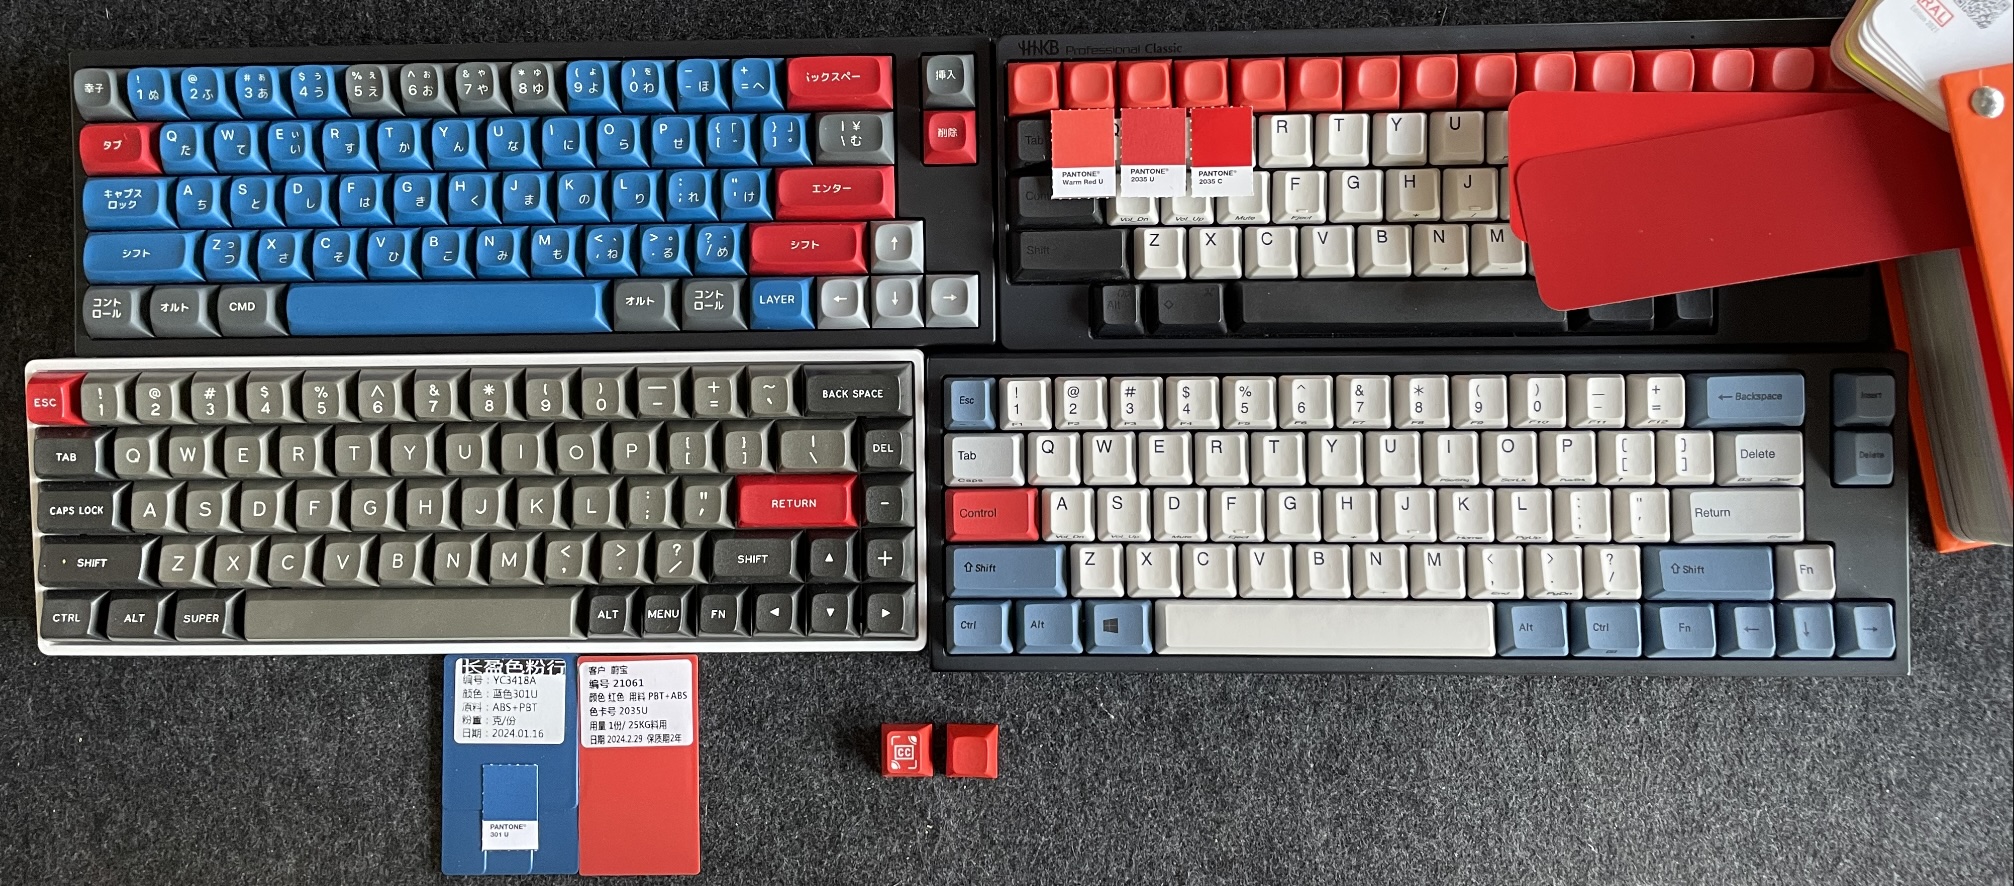 URSA the red samples with keyboards